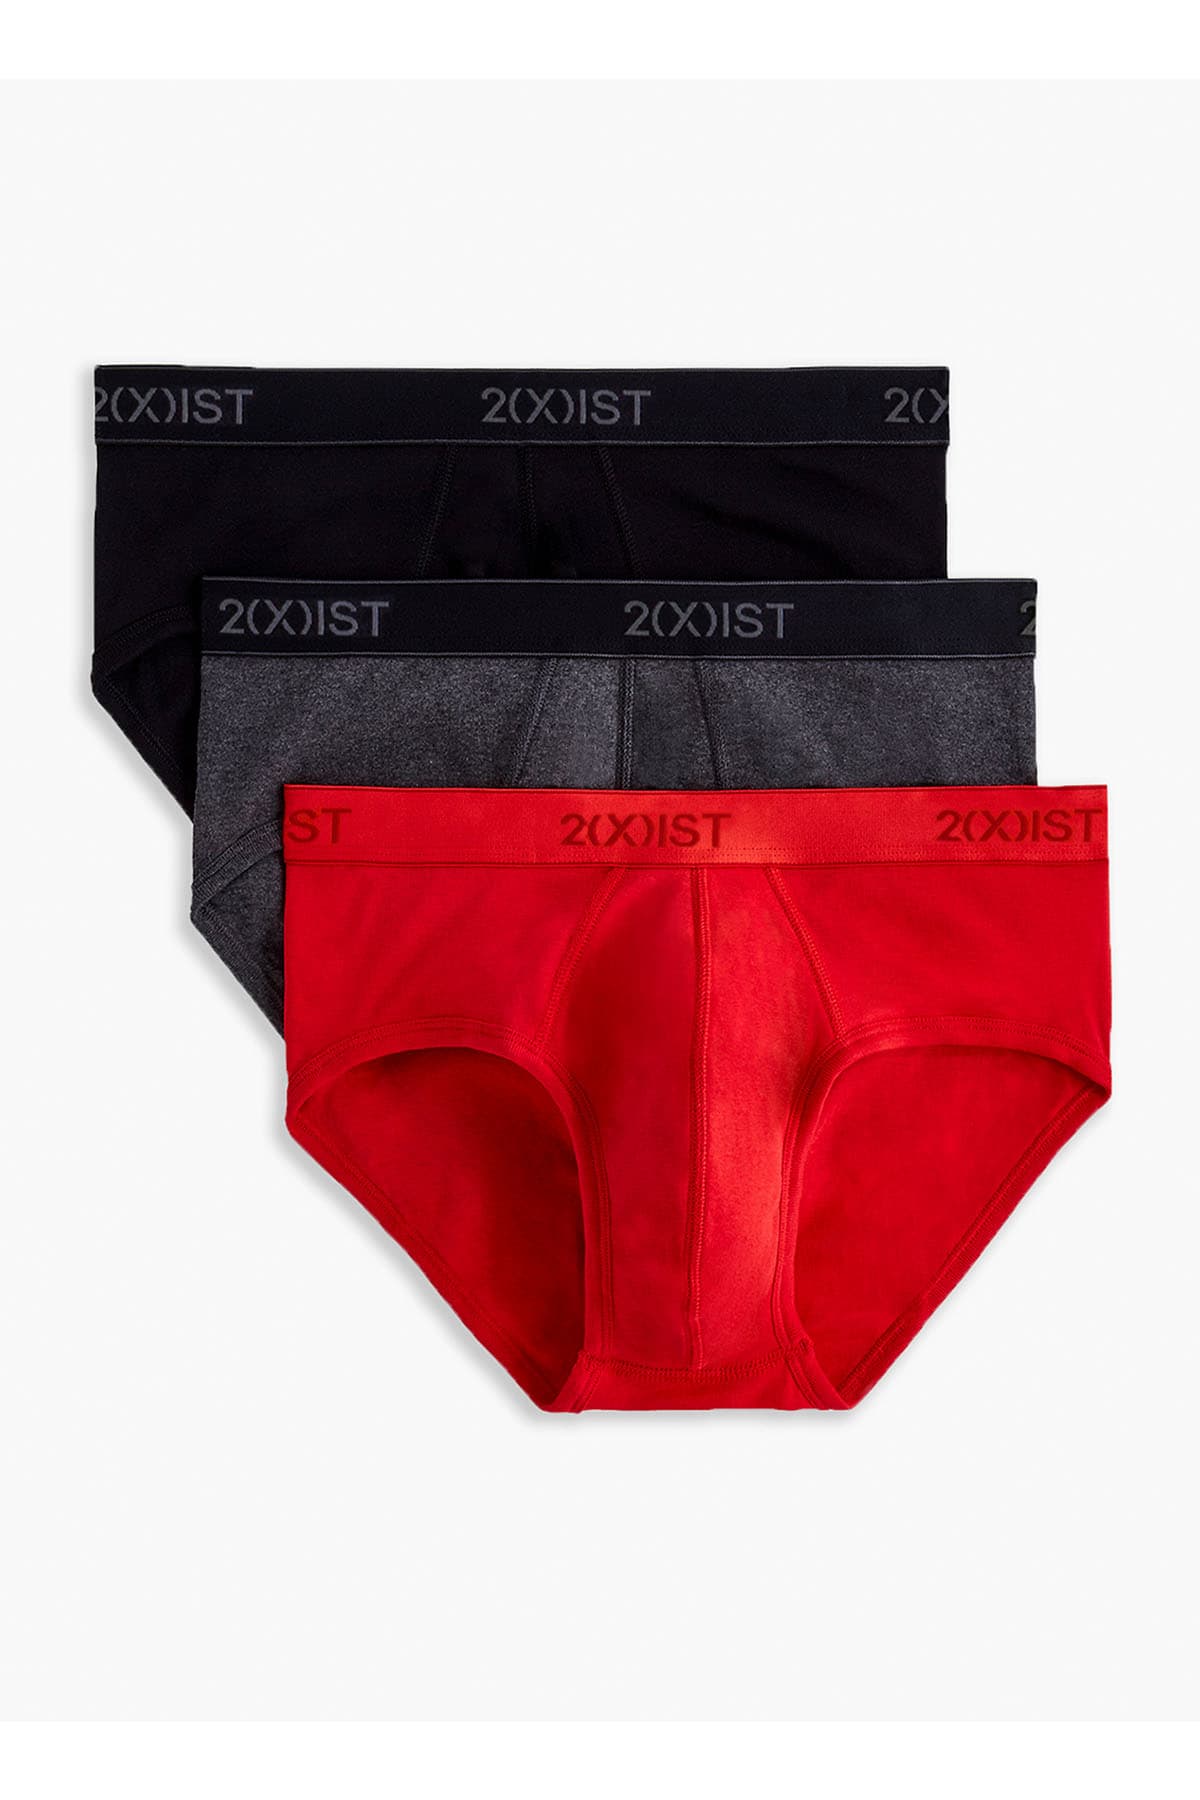 2(X)IST Red/Black/Charcoal Essential Contour Brief 3-Pack